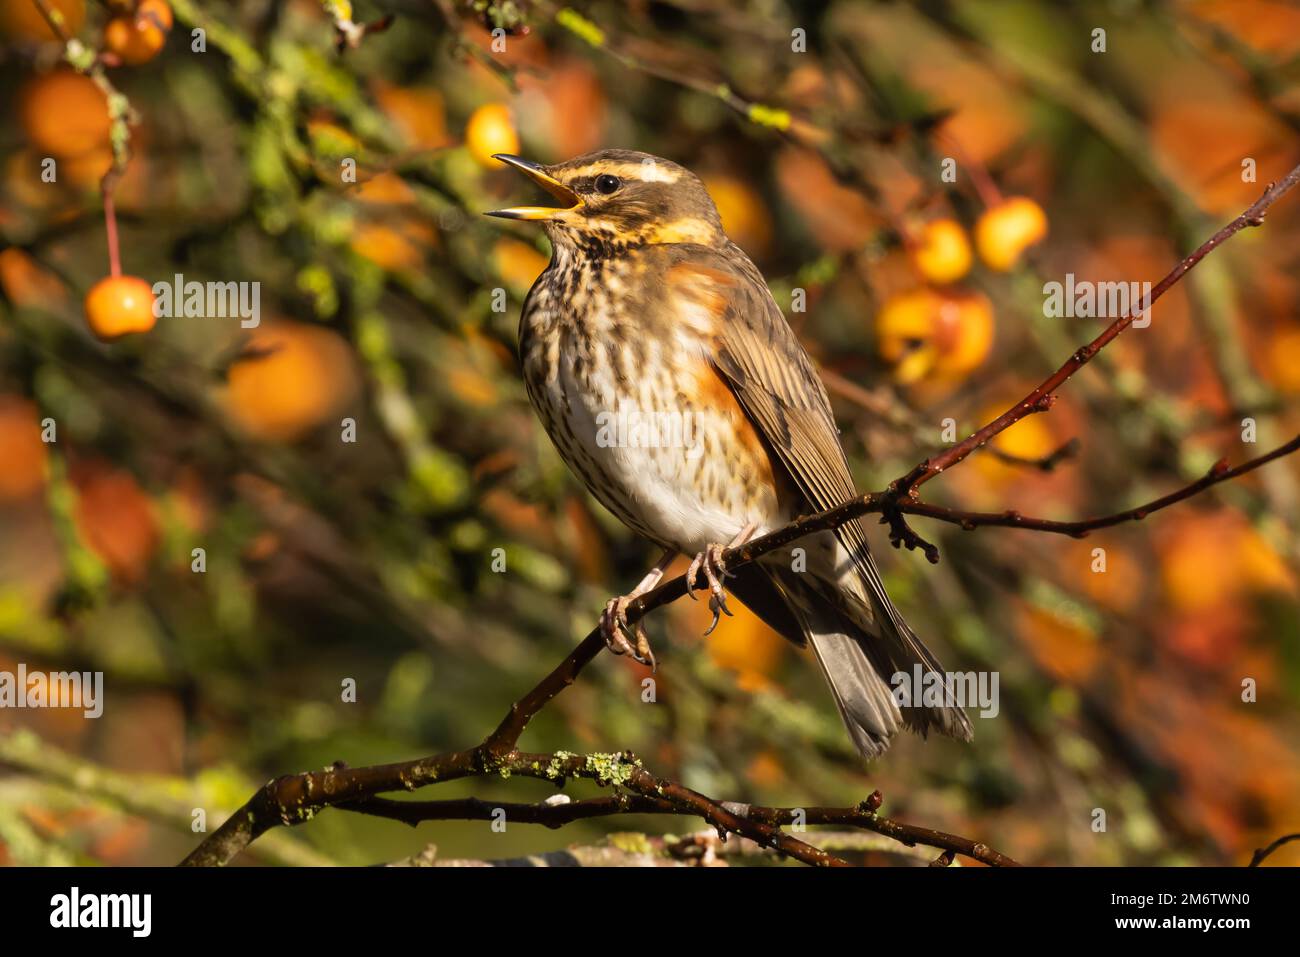 Redwing singing in a Crabapple tree Stock Photo